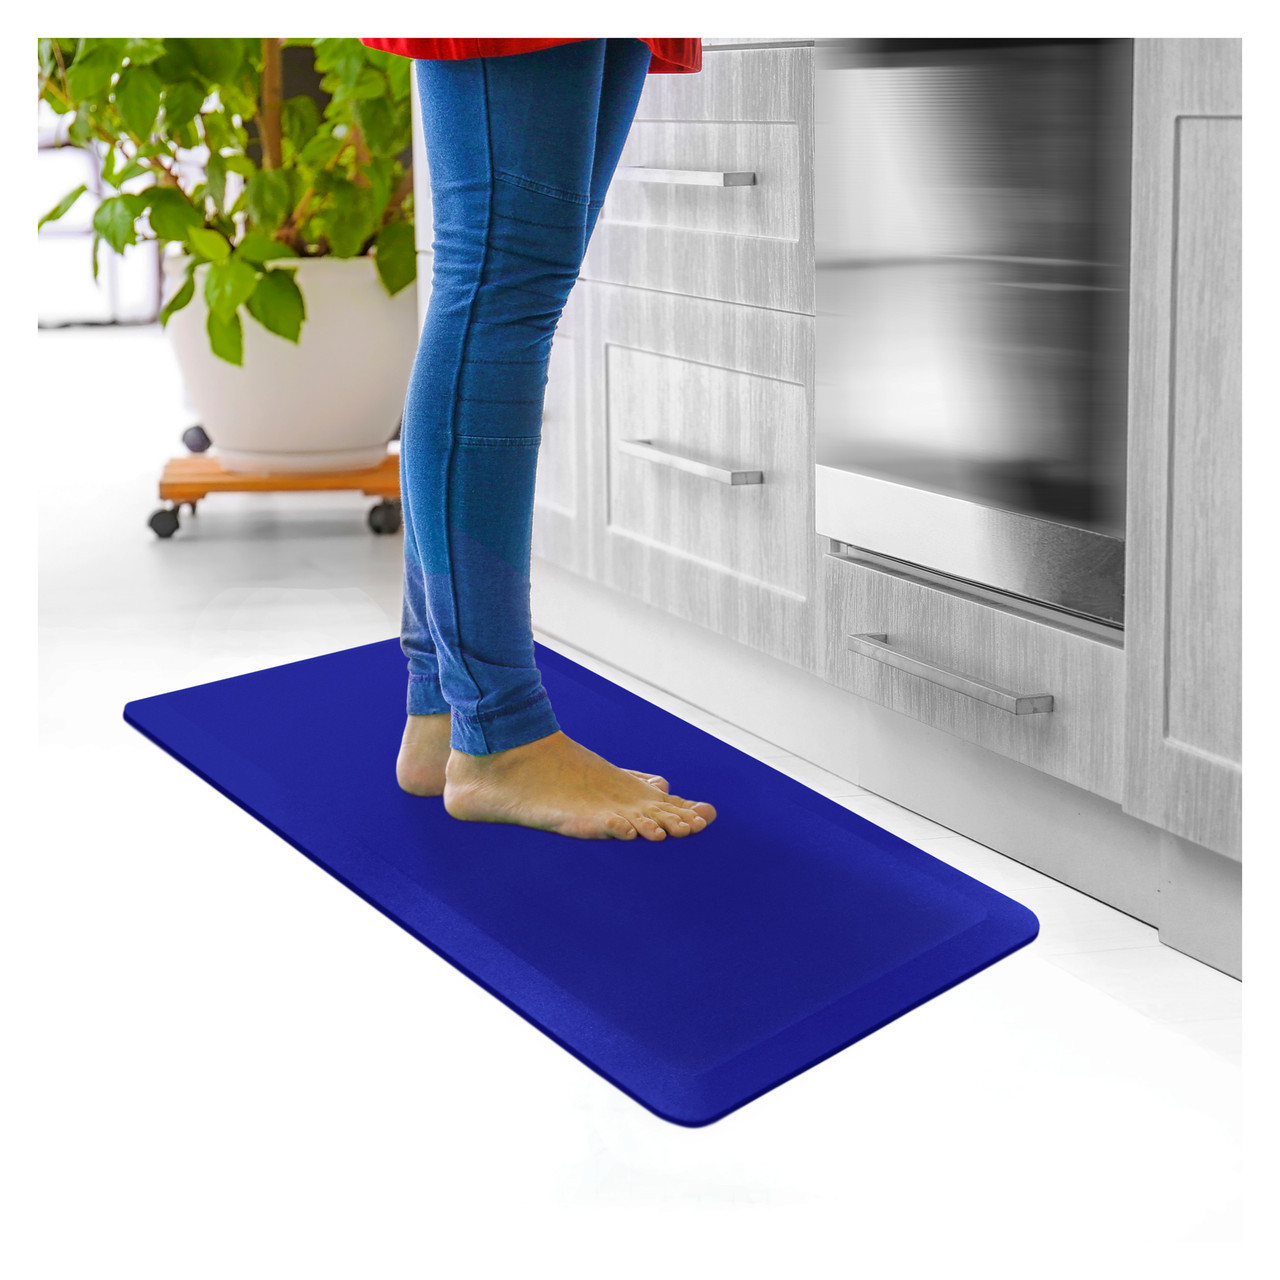 https://cdn11.bigcommerce.com/s-fjwps1jbkv/images/stencil/1280x1280/products/330/3434/ultralux-premium-anti-fatigue-floor-comfort-mat-or-durable-ergonomic-multi-purpose-non-slip-standing-support-pad-or-34-thick-or-blue__28116.1688991646.jpg?c=2?imbypass=on